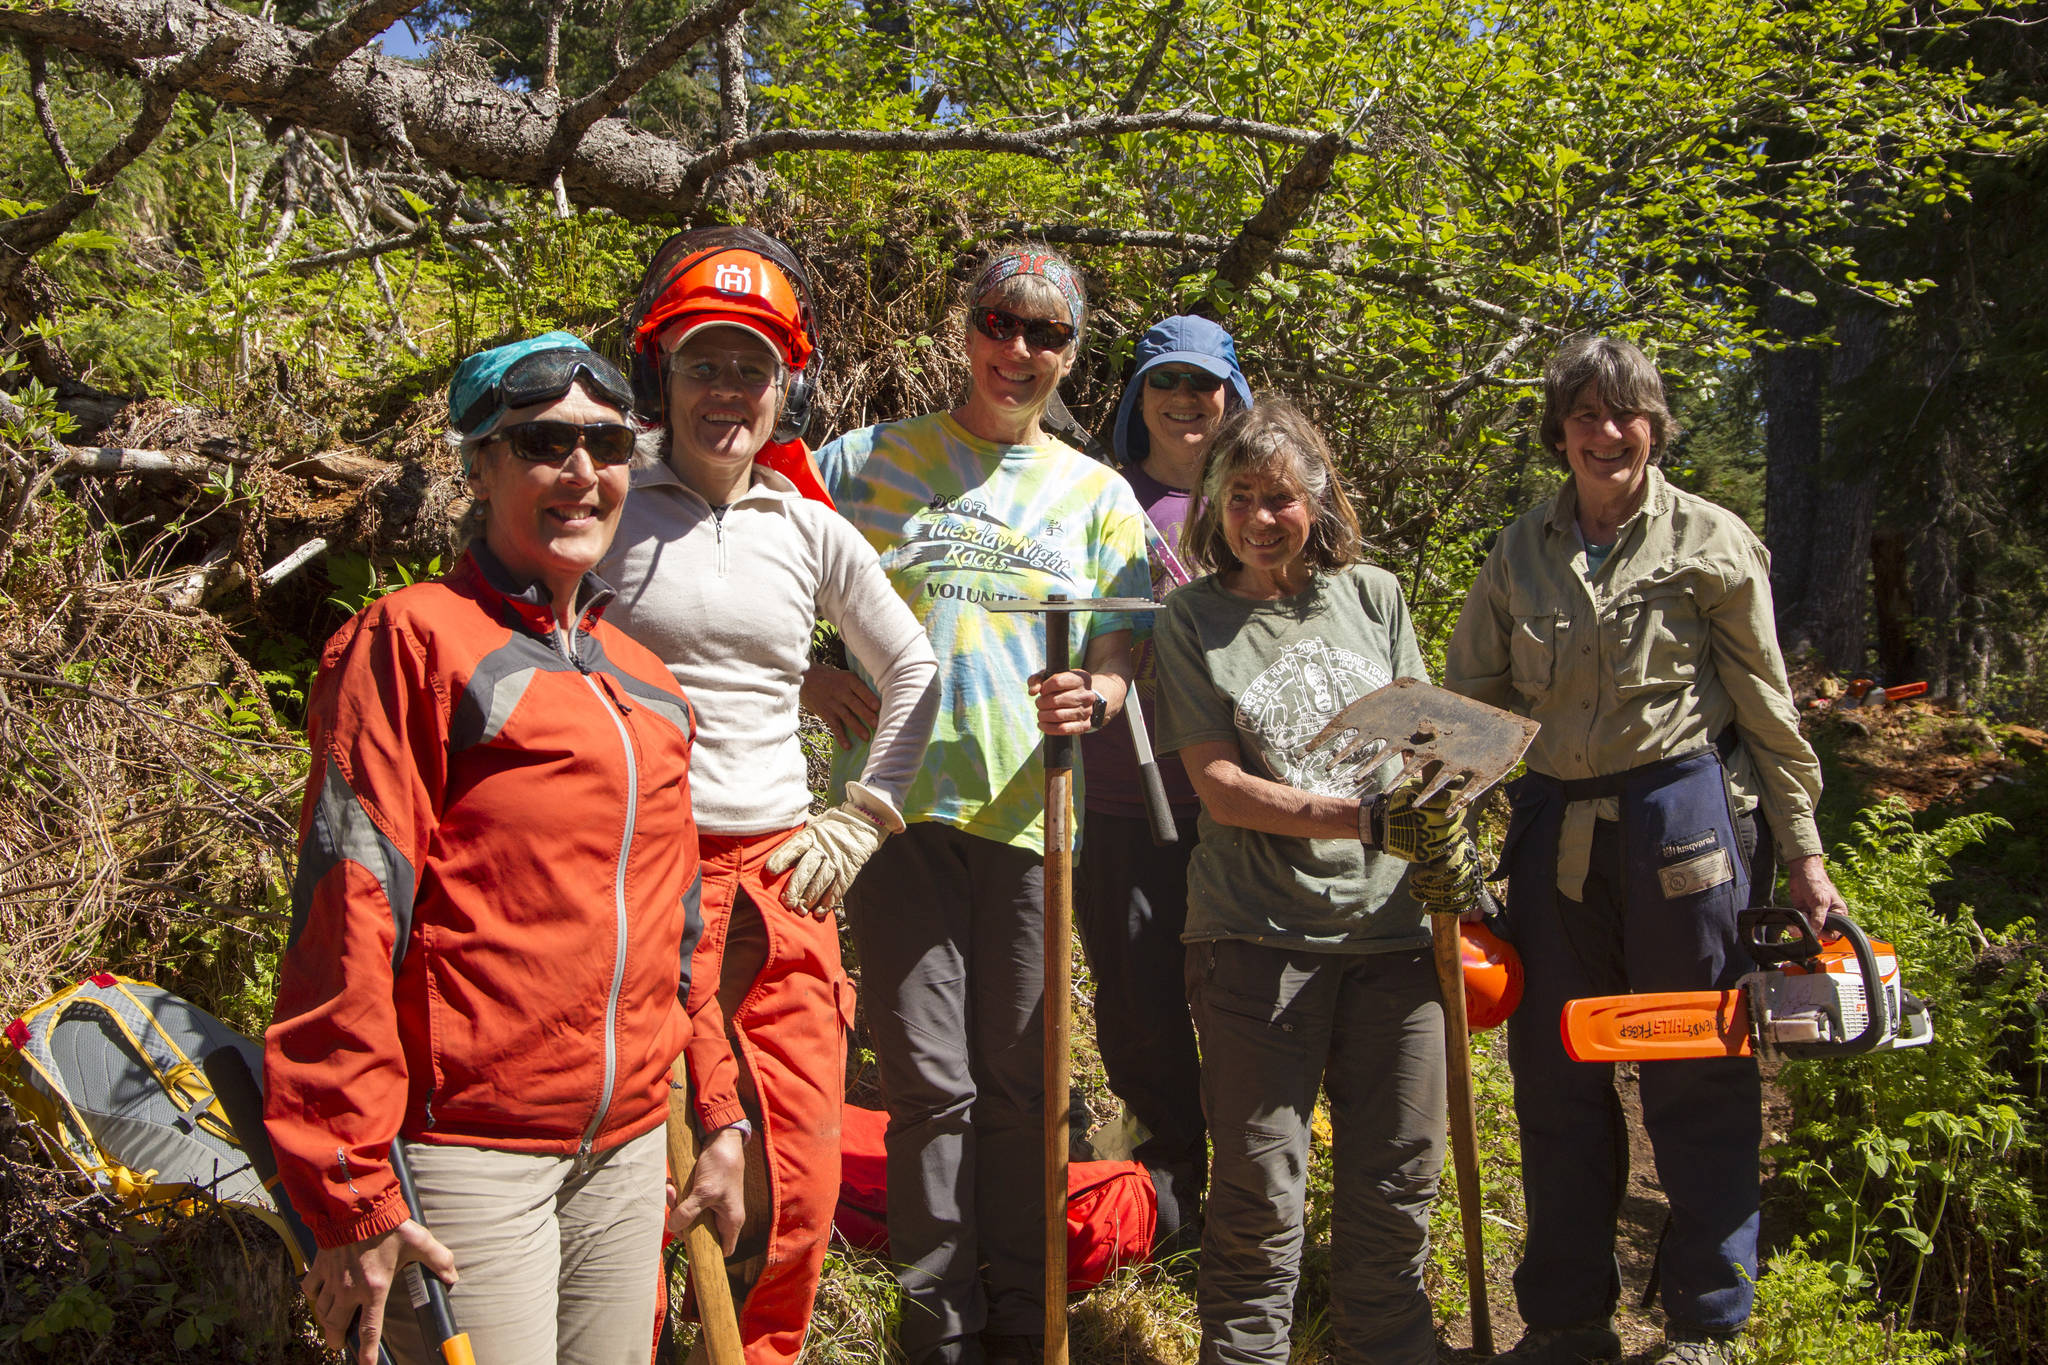 A group of six women tackled the work needing to be done during National Trails Day at South Eldred trail including cutting up fallen trees, re-establishing the trail tread, clearing overgrown plants and ensuring the trail markings were in sight and up-to-date. Pictured left to right are Kristine Moerlien, Amy Holman, Kathy Sarns, Lyn Maslow, Ruth Dickerson and Kris Holderied. (Photo by Sarah Knapp/Homer News)